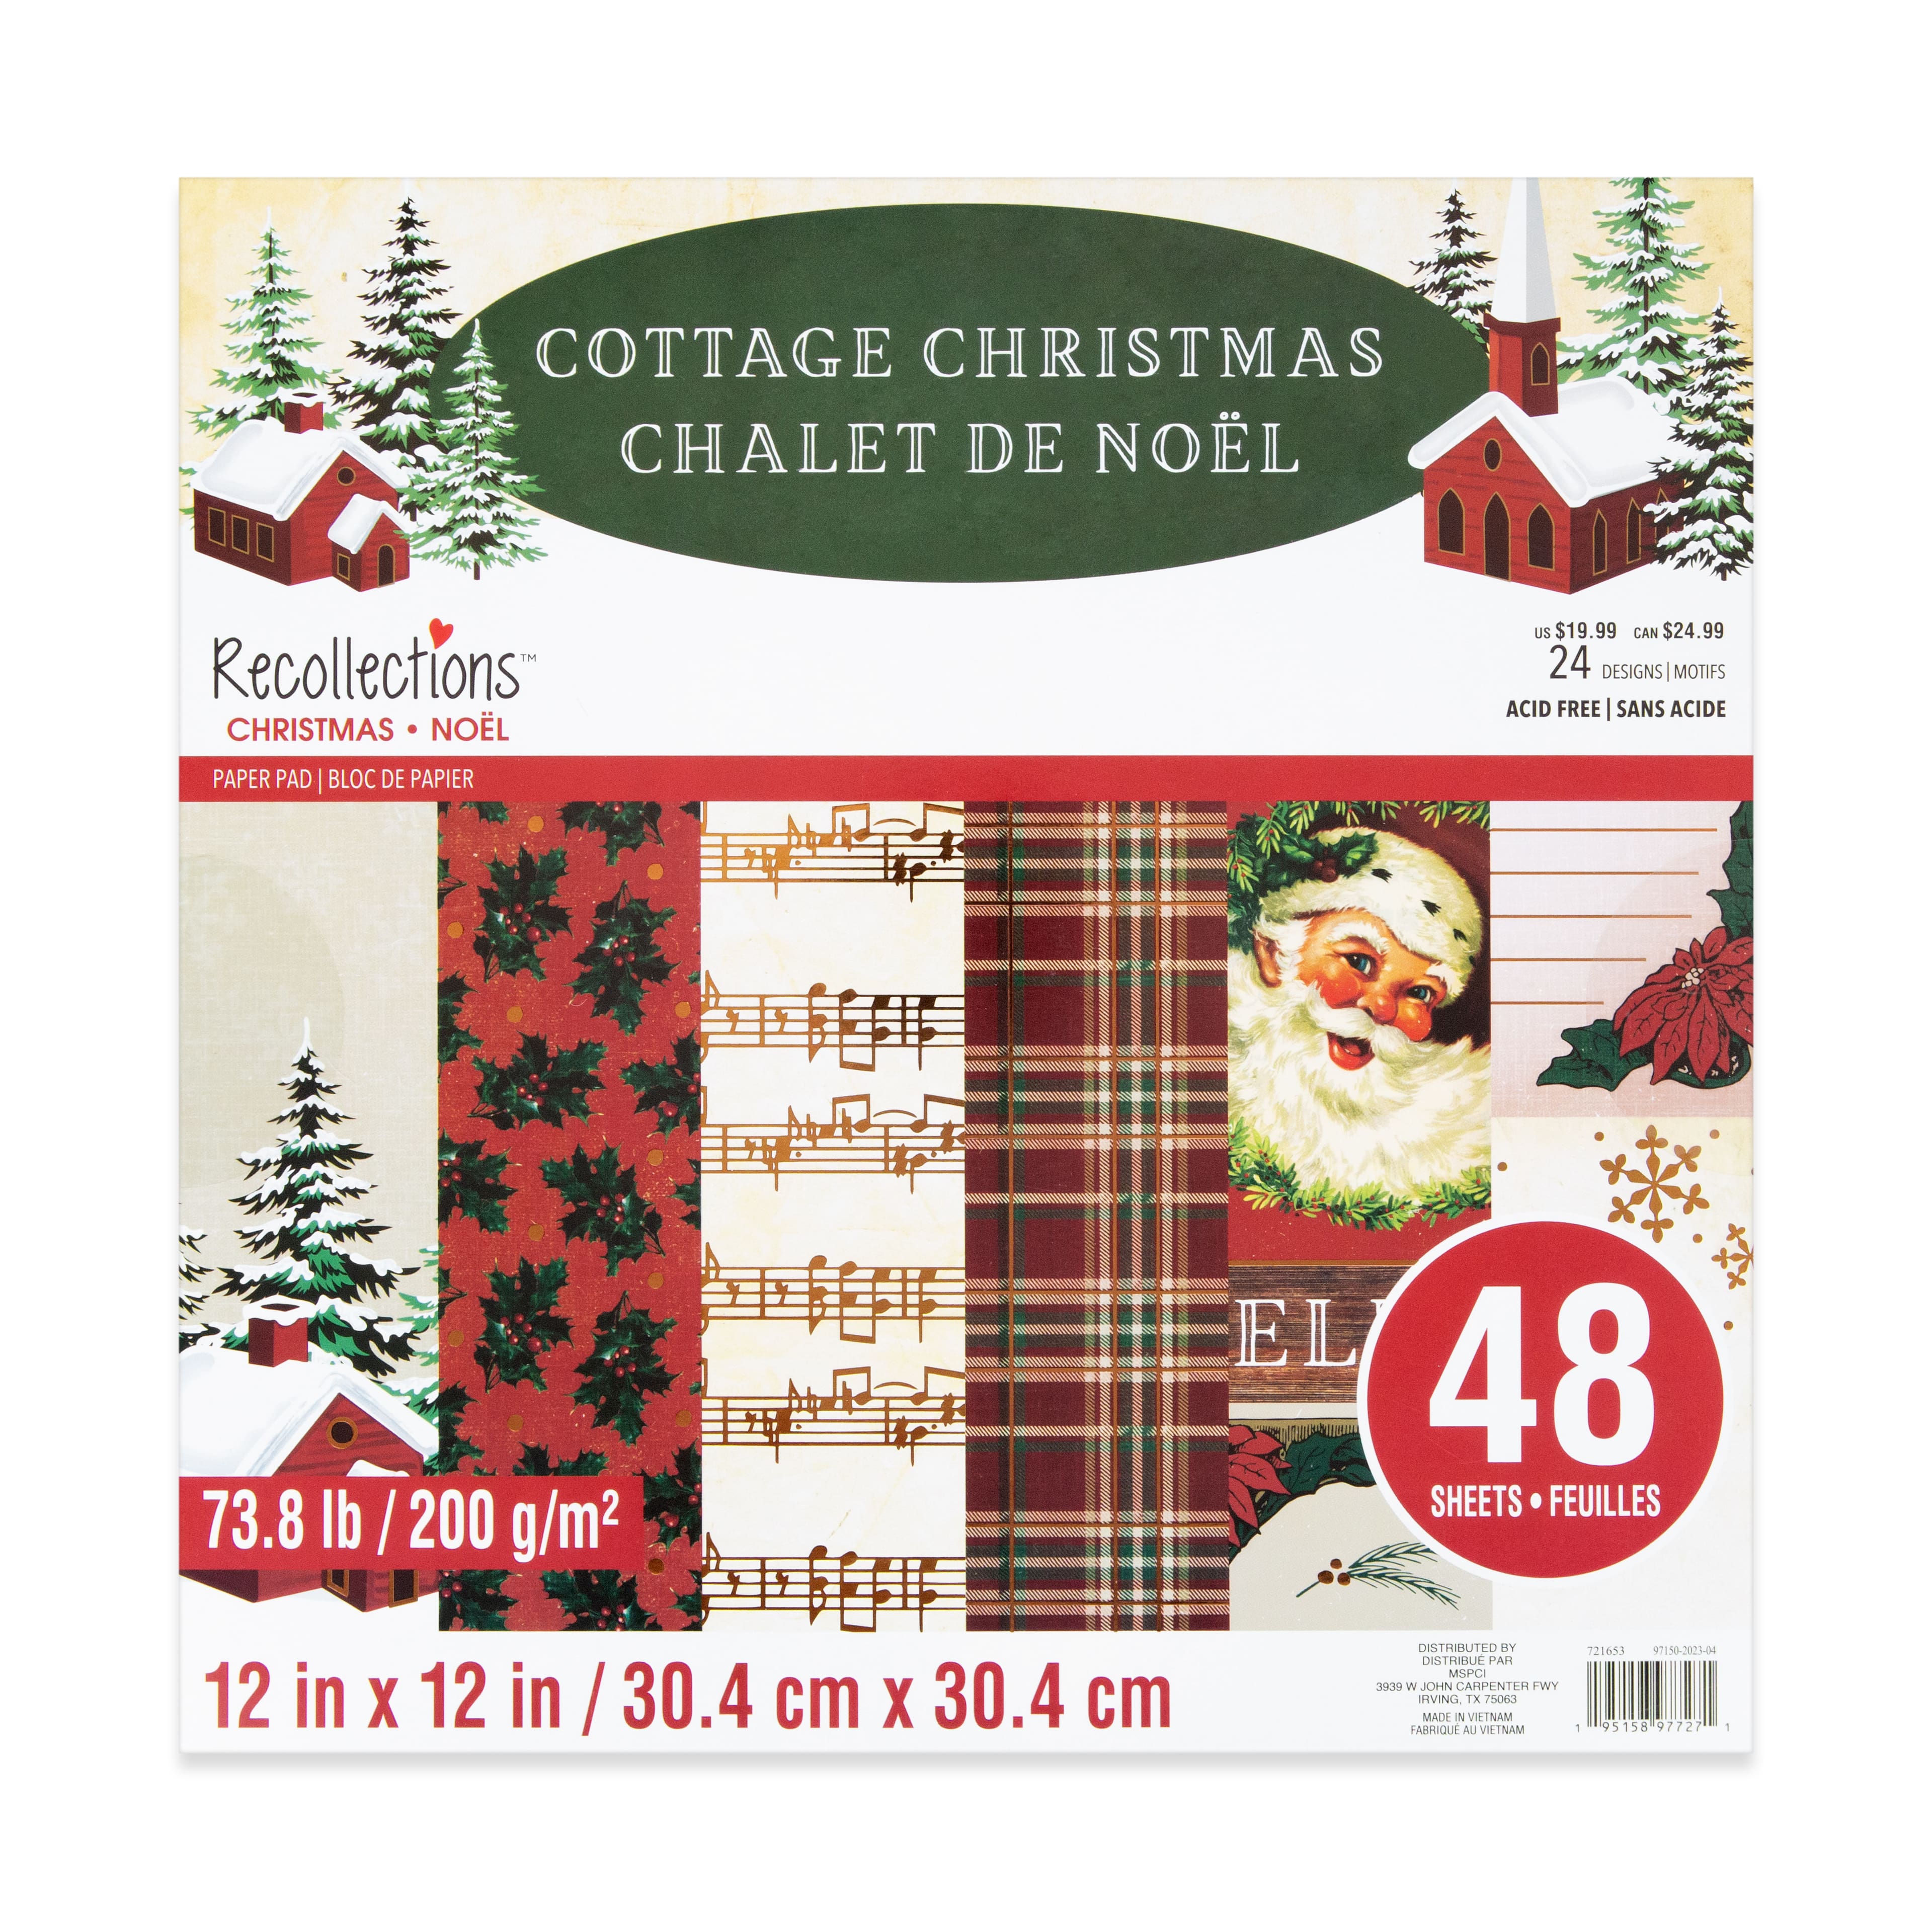 Peaceful Christmas Flora: Peaceful Stems 12x12 Patterned Paper